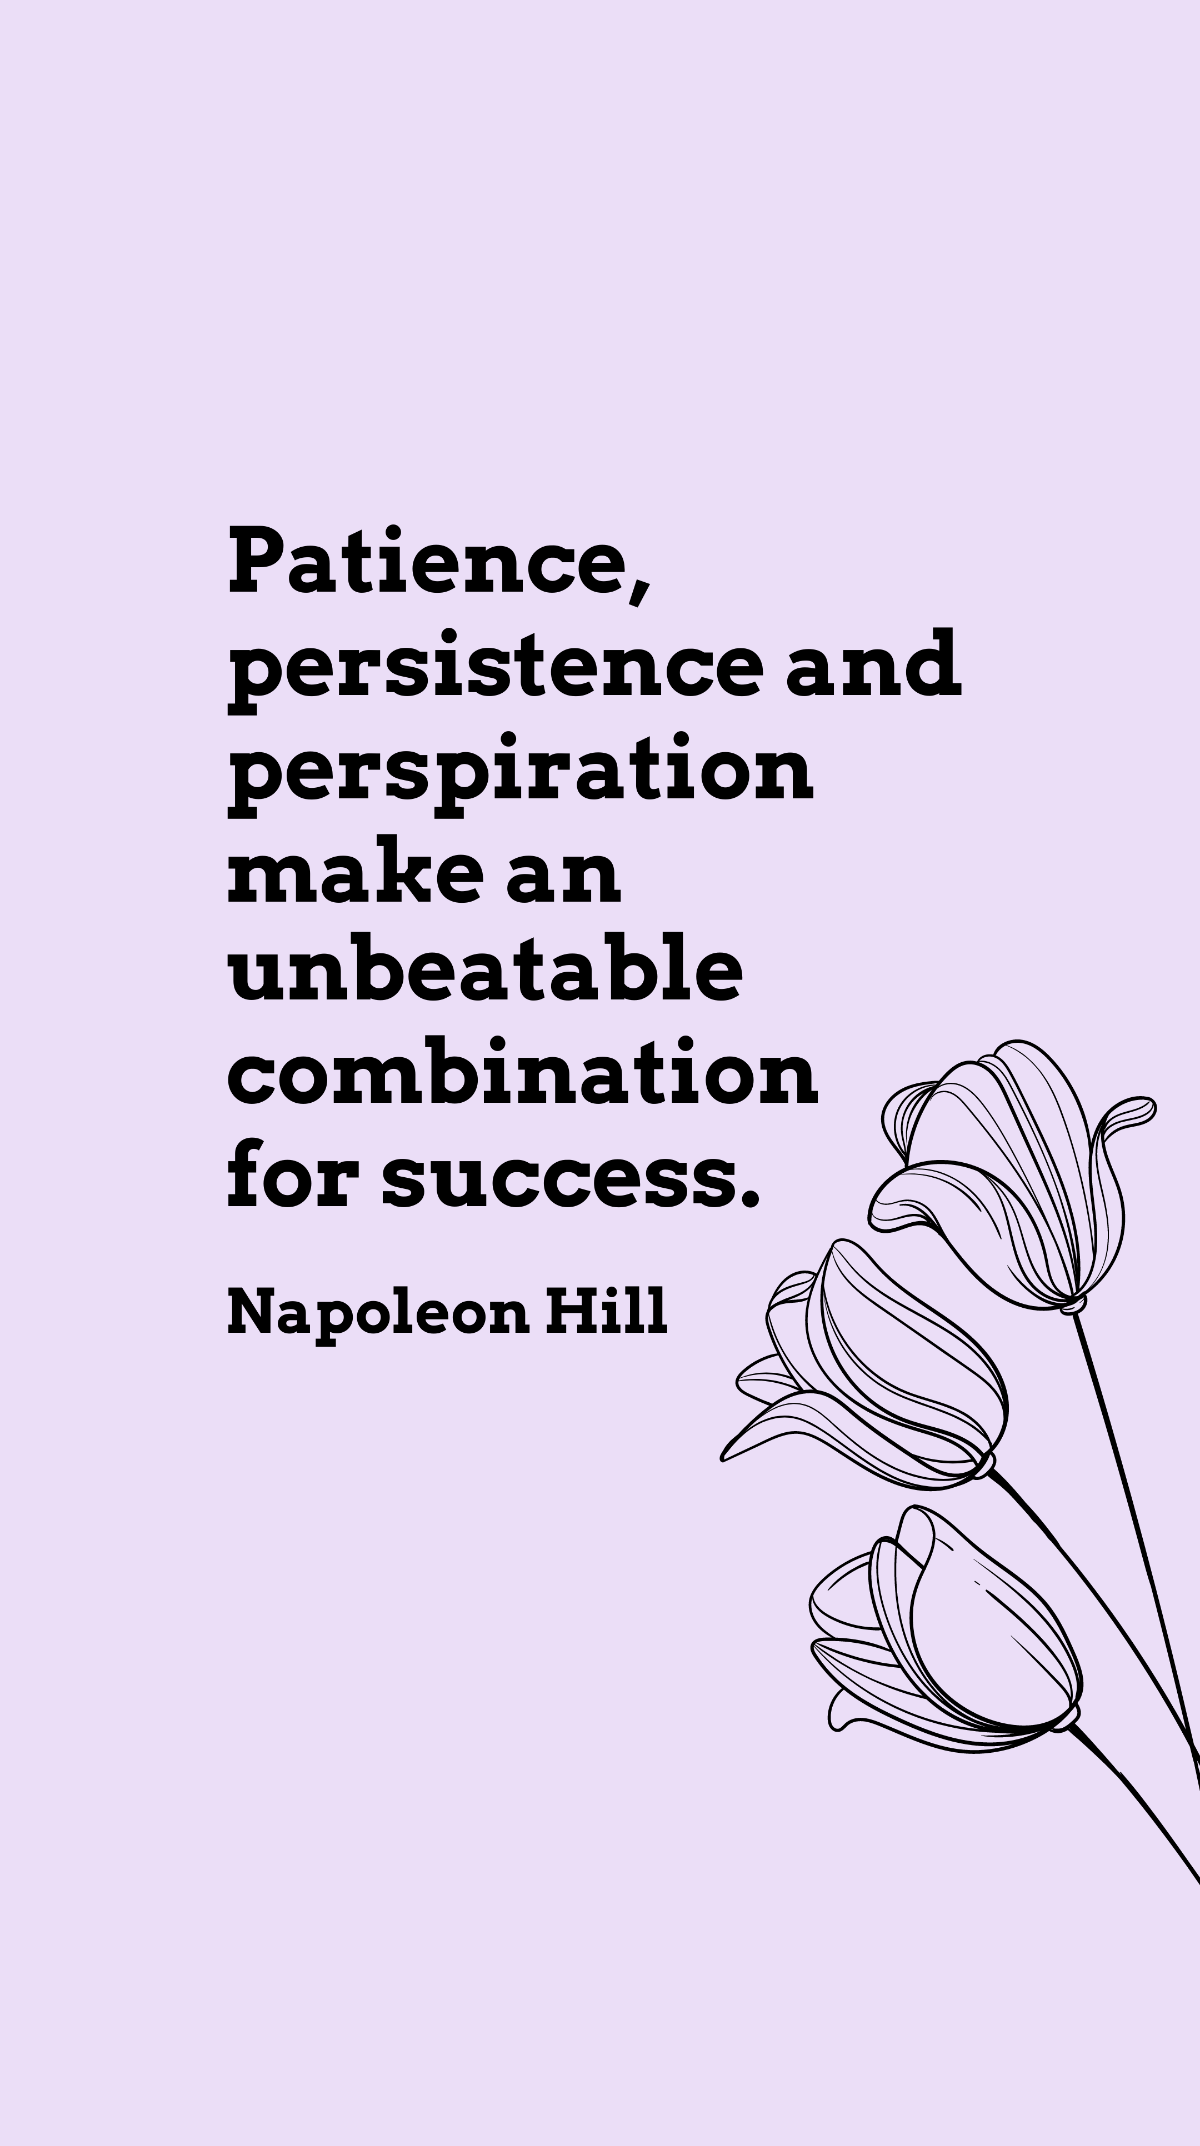 Napoleon Hill - Patience, persistence and perspiration make an unbeatable combination for success. Template